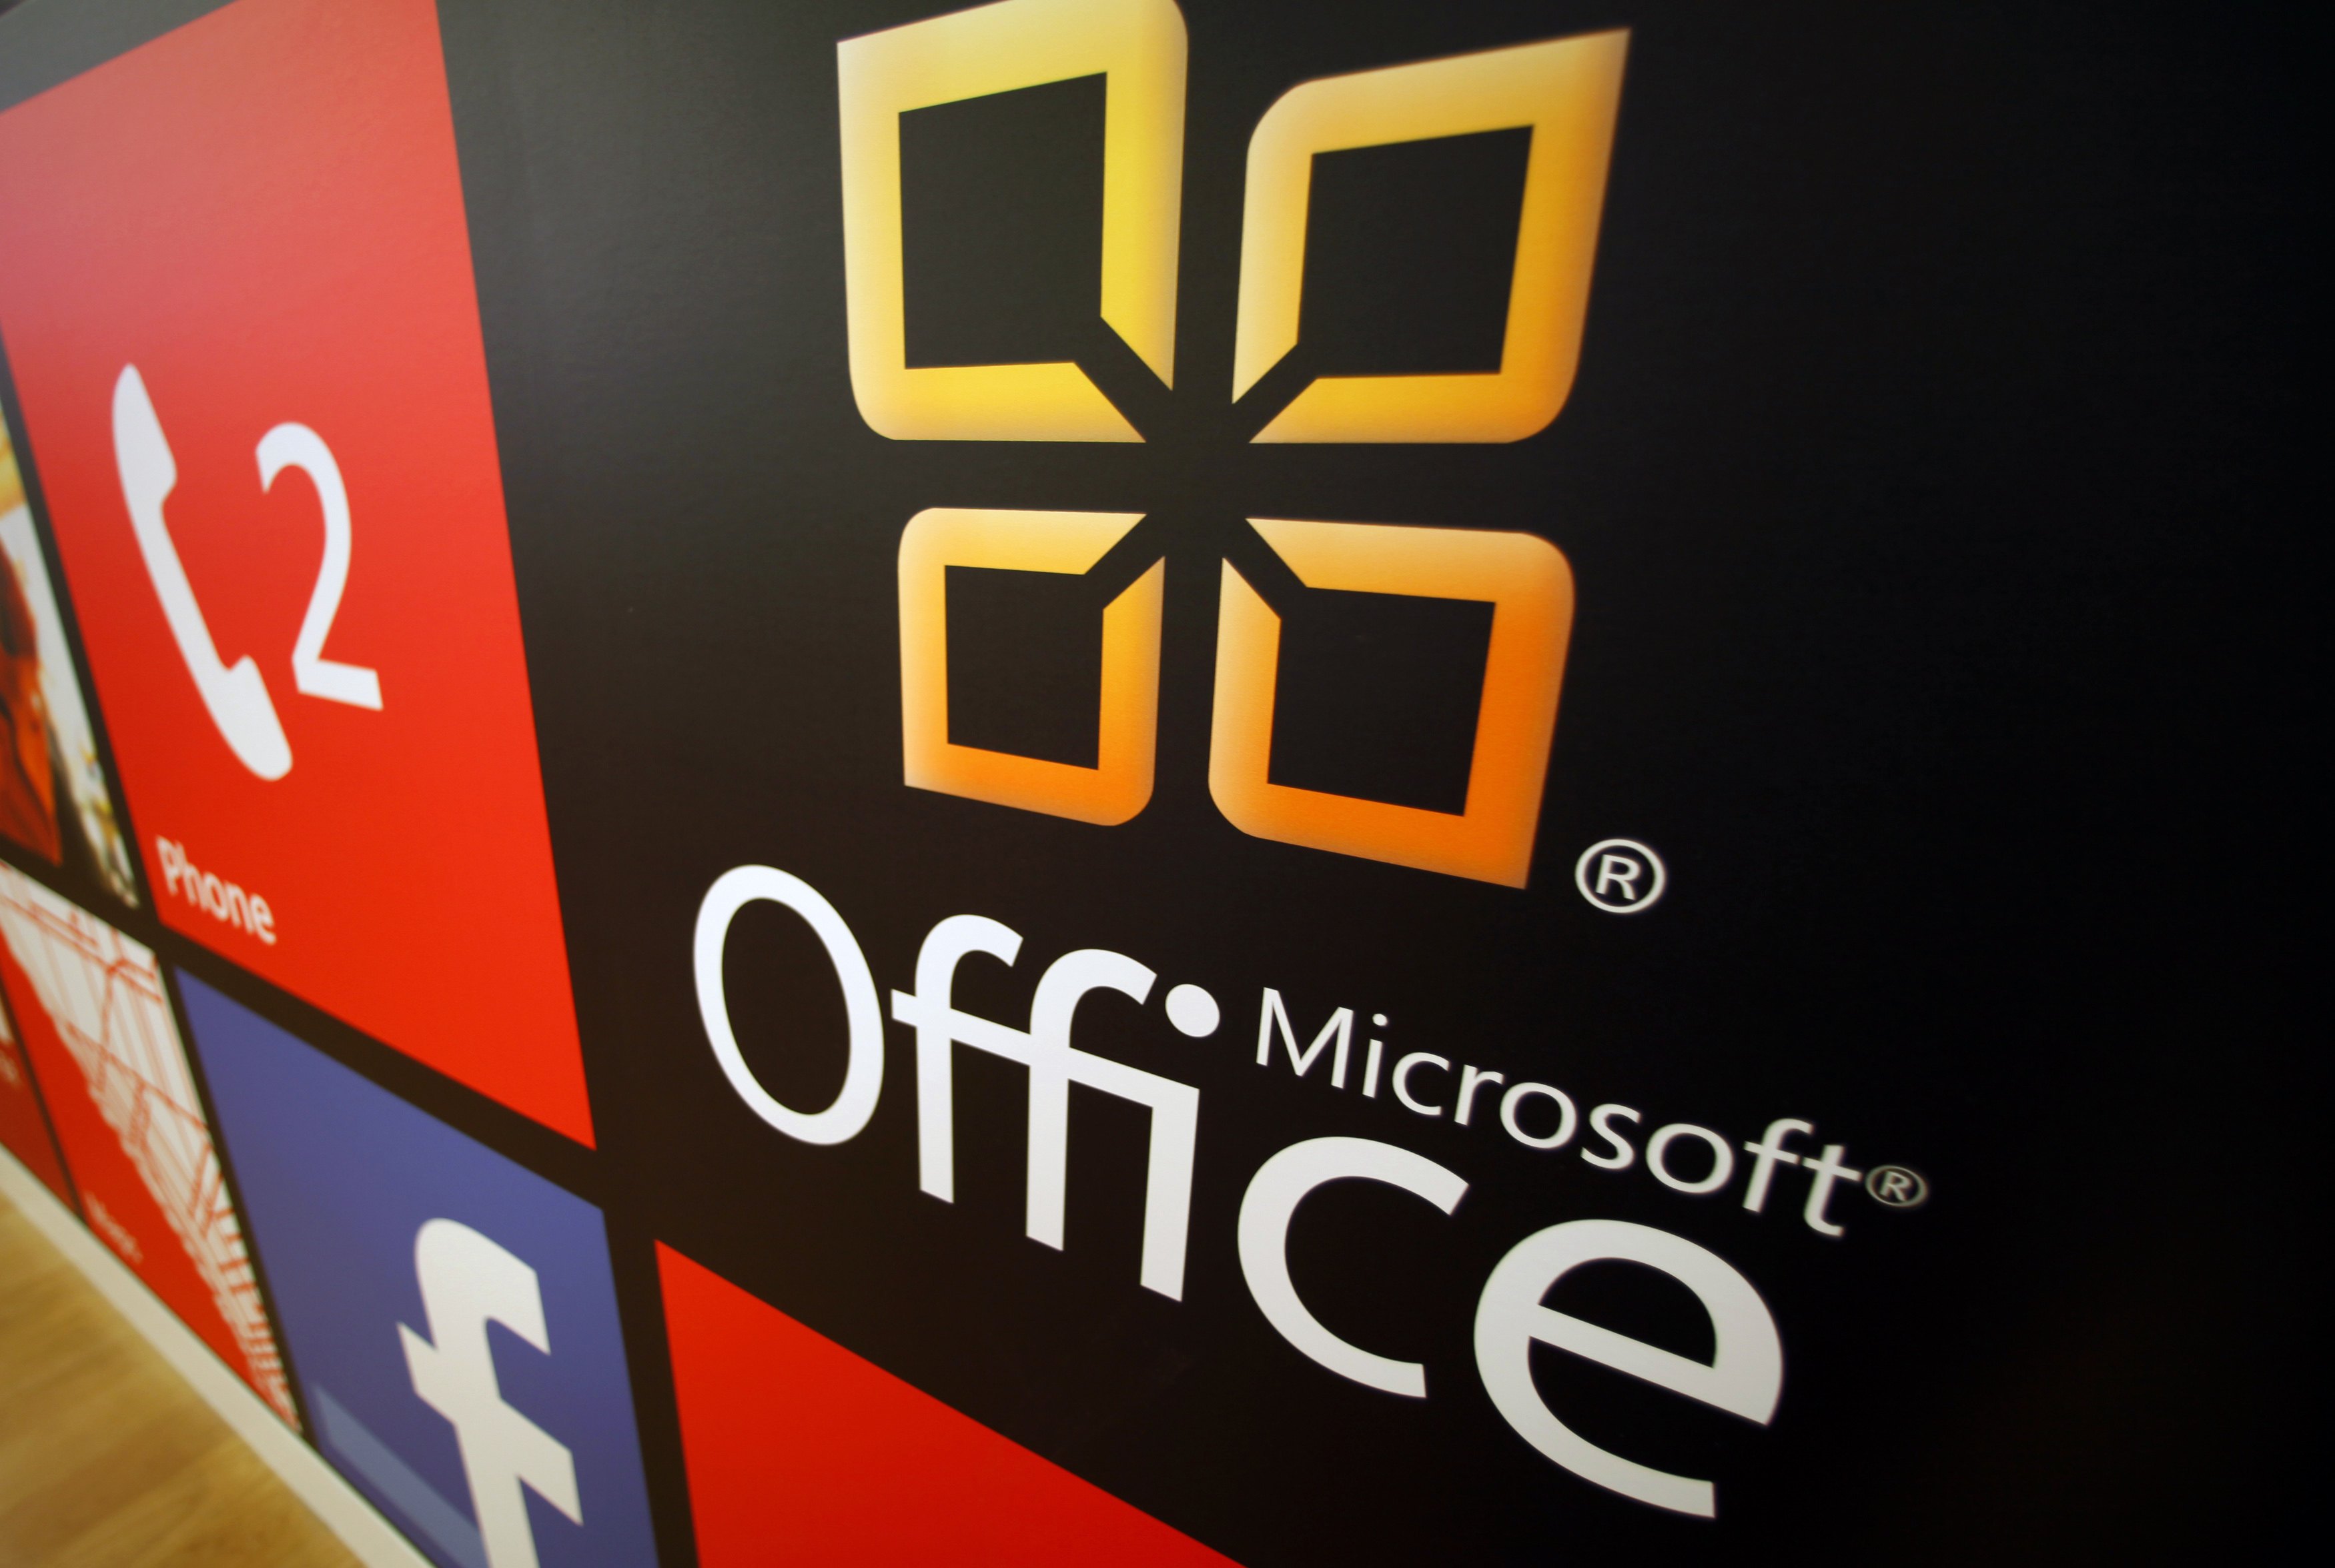 File photo of Microsoft Office logo on display at a Microsoft retail store in San Diego